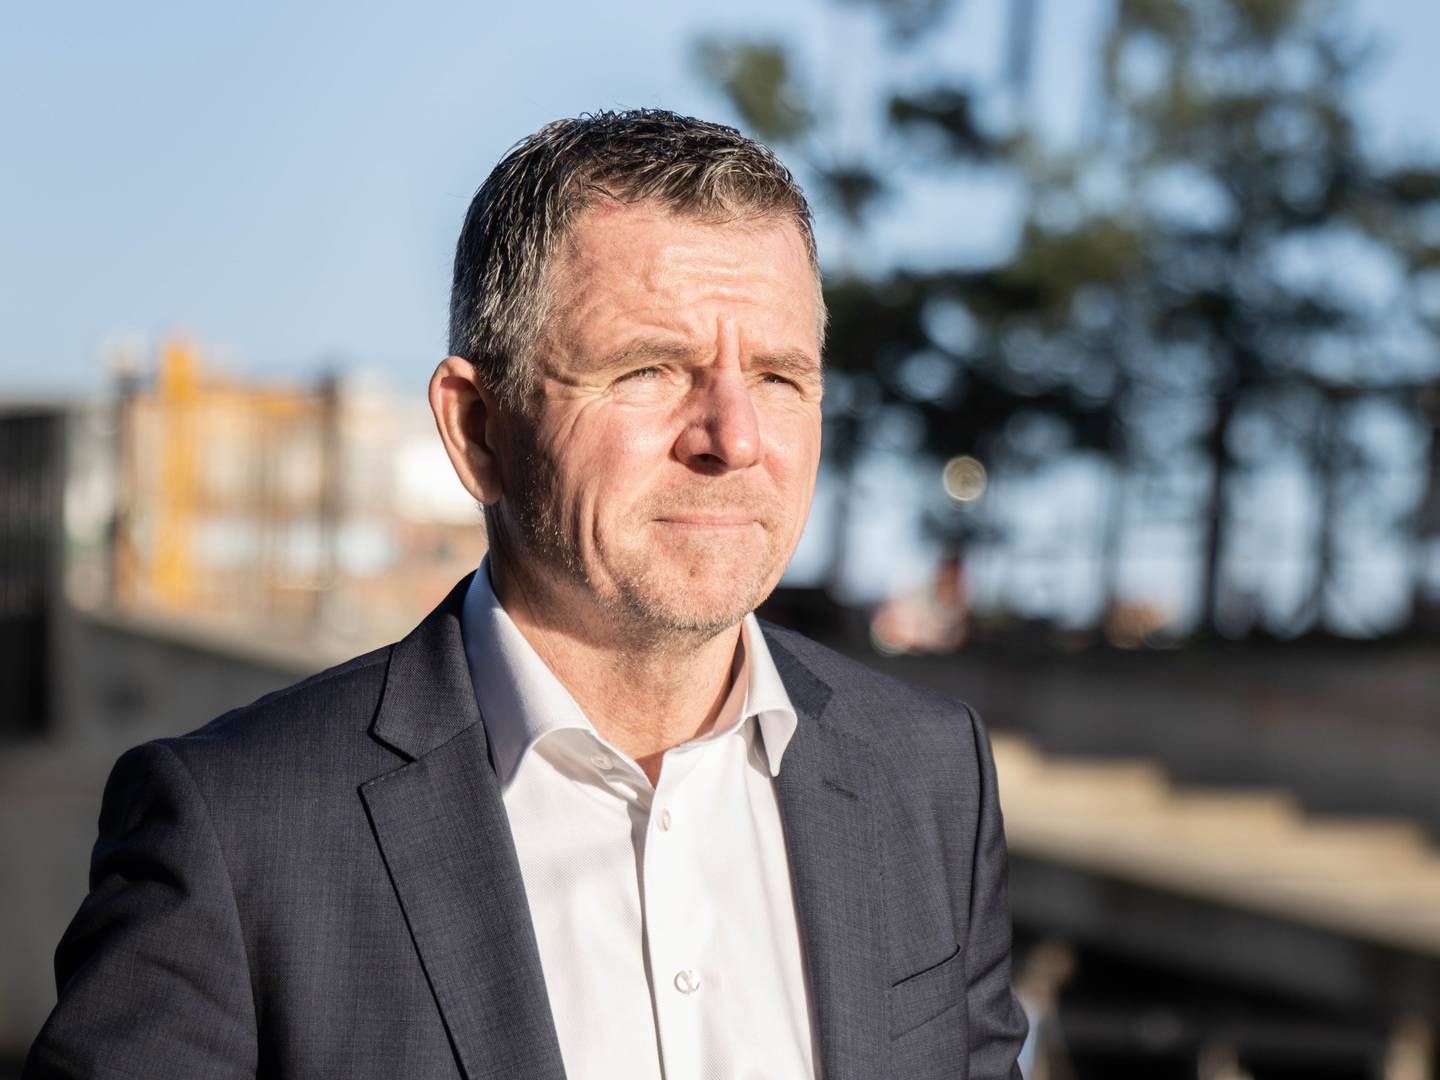 Henrik Dahl Jeppesen became CEO of PKA Properties on February 1 this year. He is now in the process of recruiting his team. | Photo: David Engstrøm